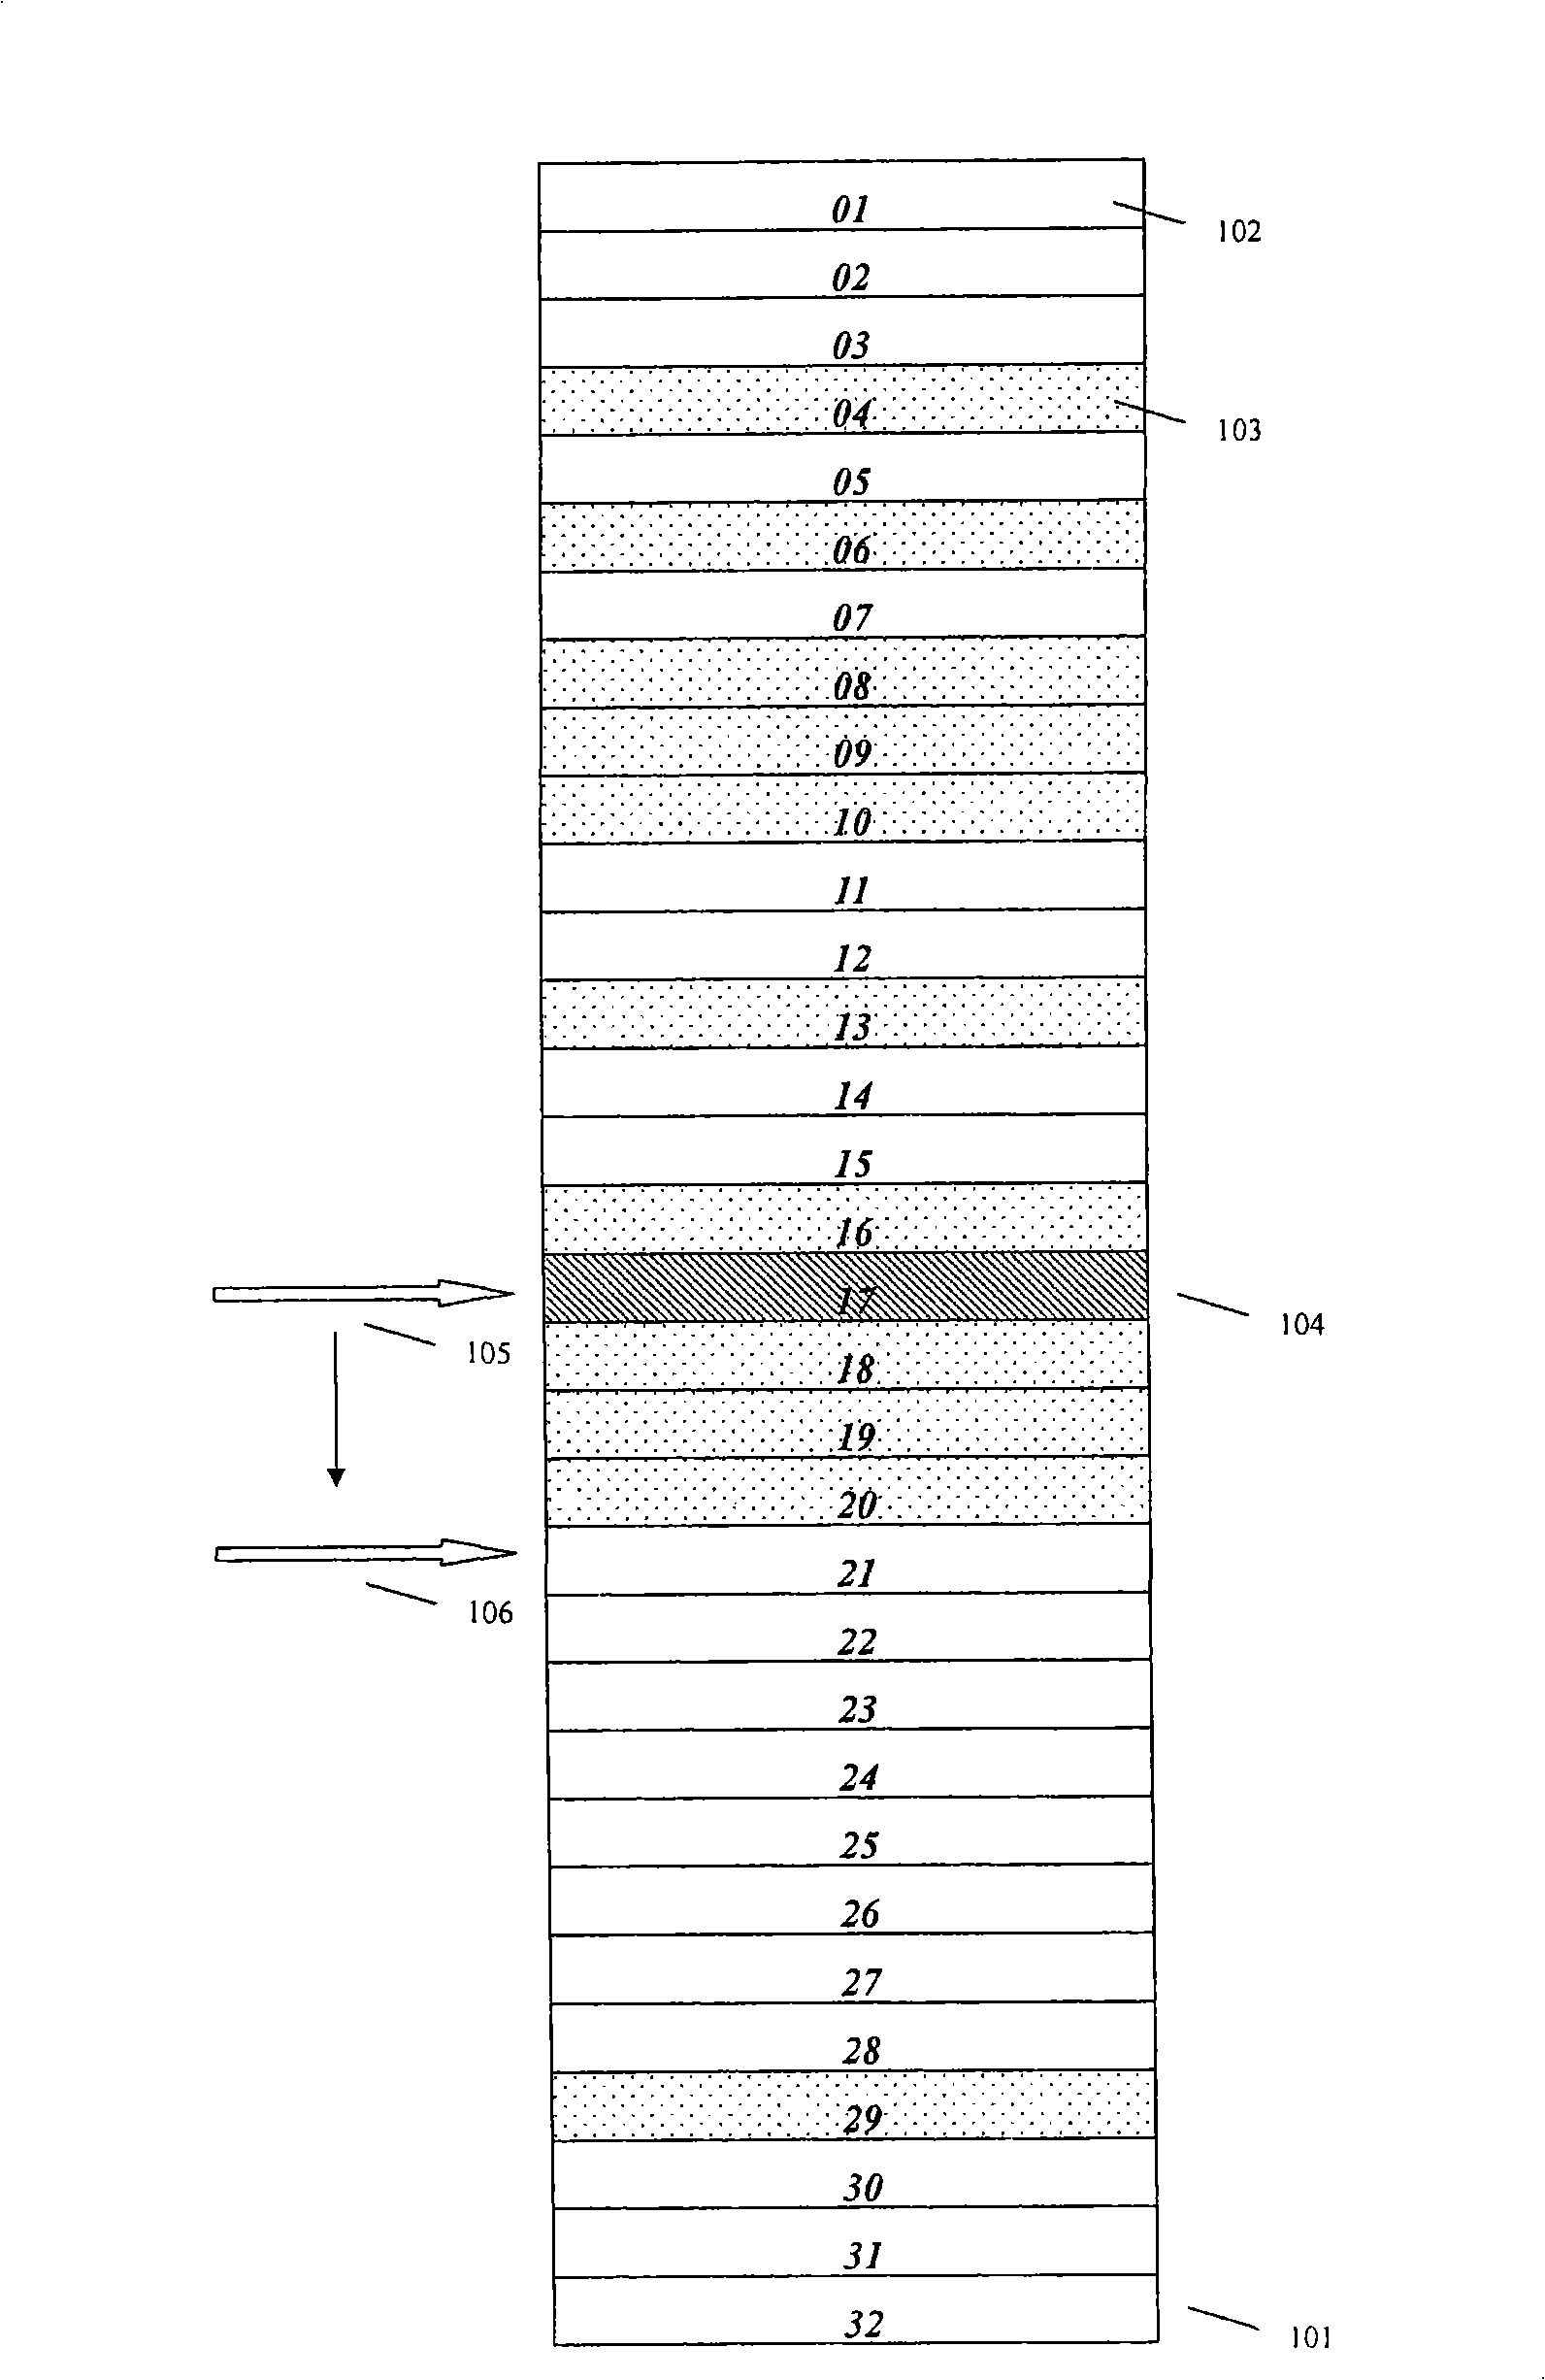 Global positioning system satellite searching and scheduling method